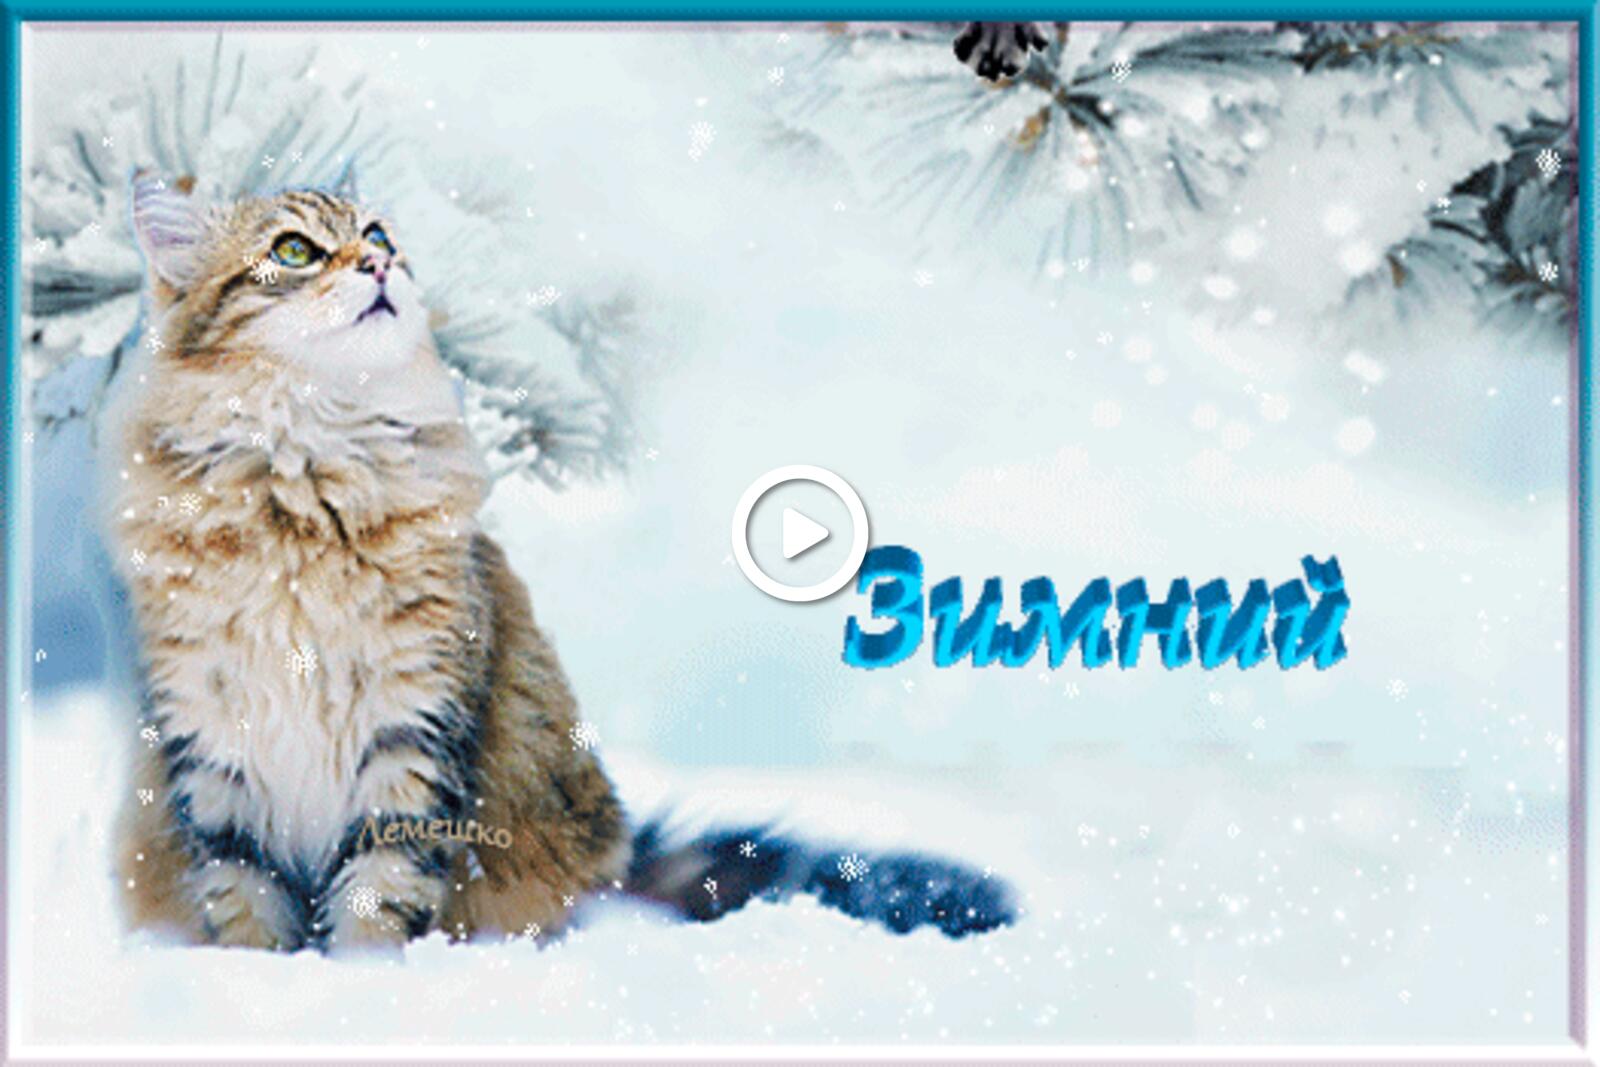 A postcard on the subject of snowfall 3dtext red kitty for free